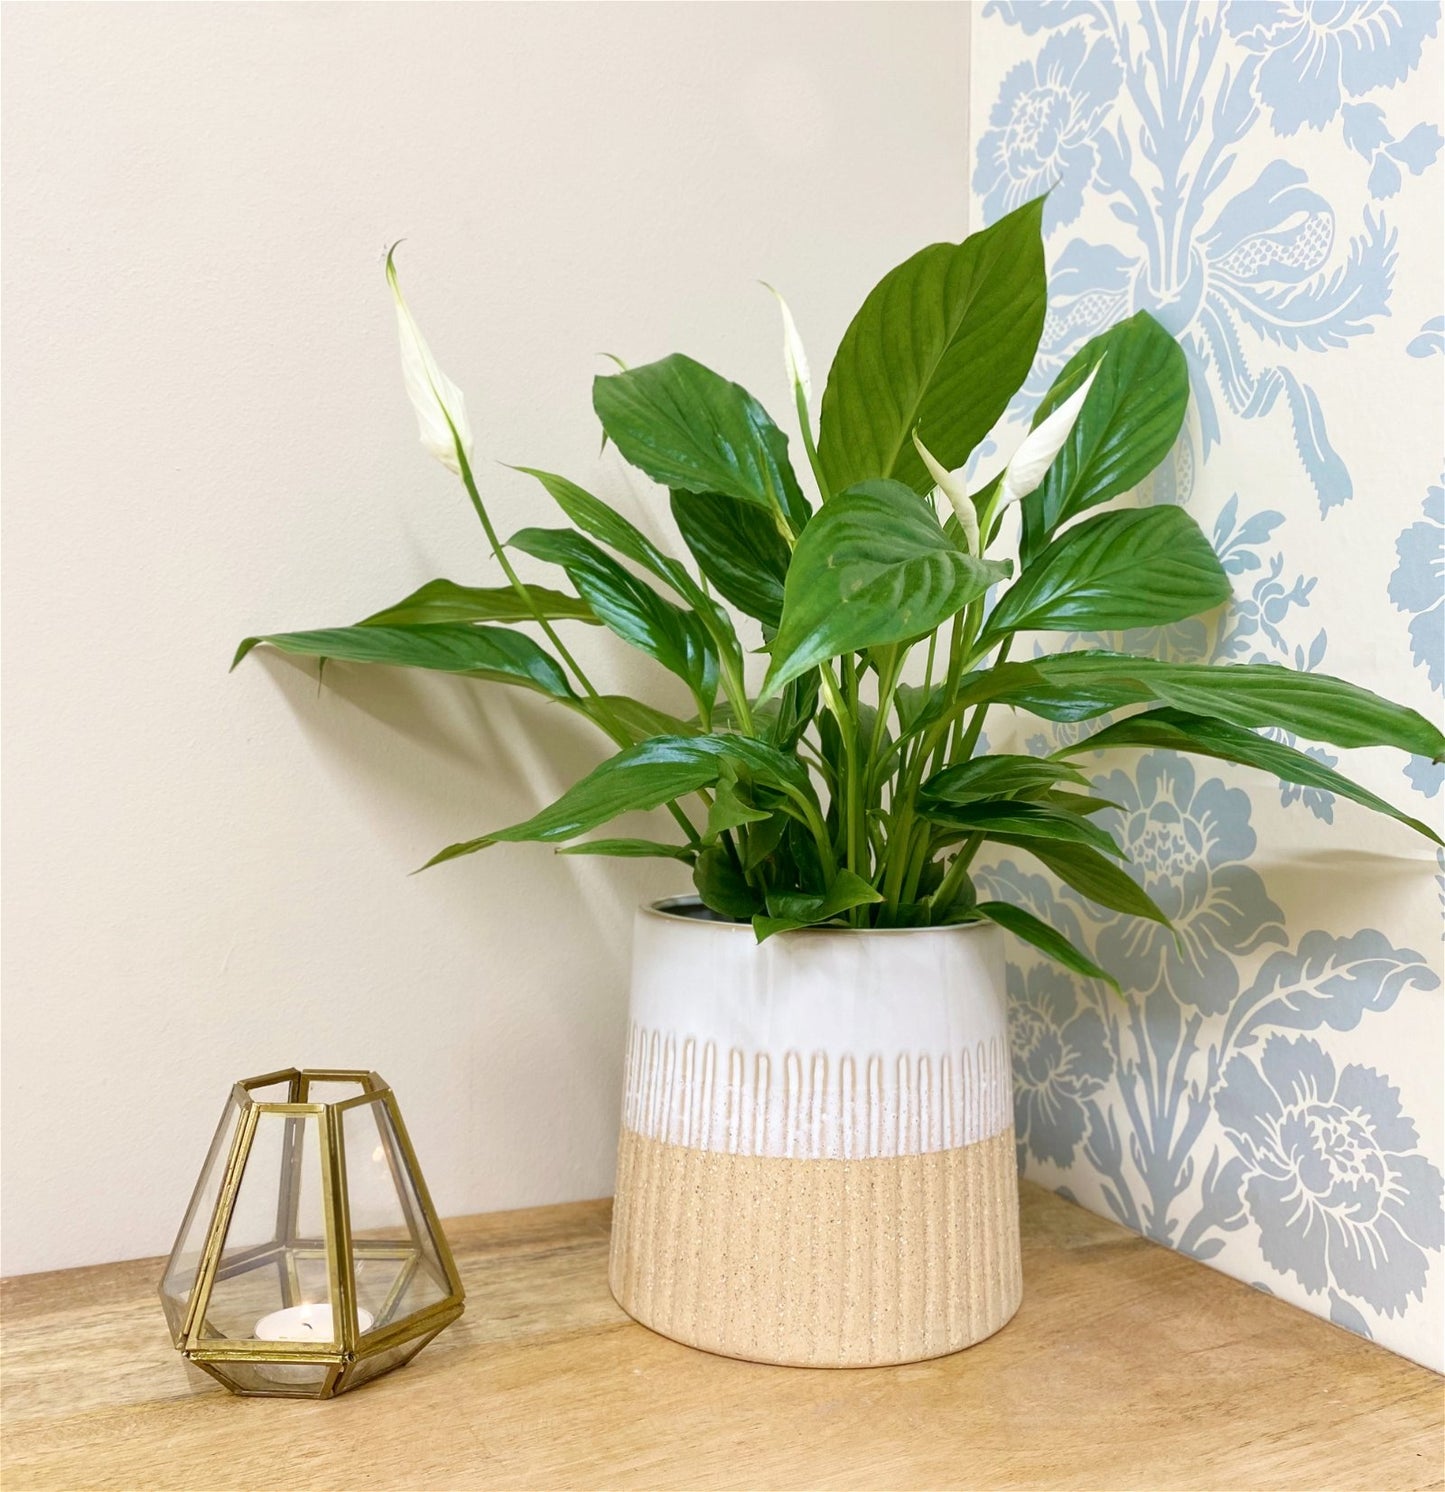 Two-tone Textured Ceramic Planter - a Cheeky Plant